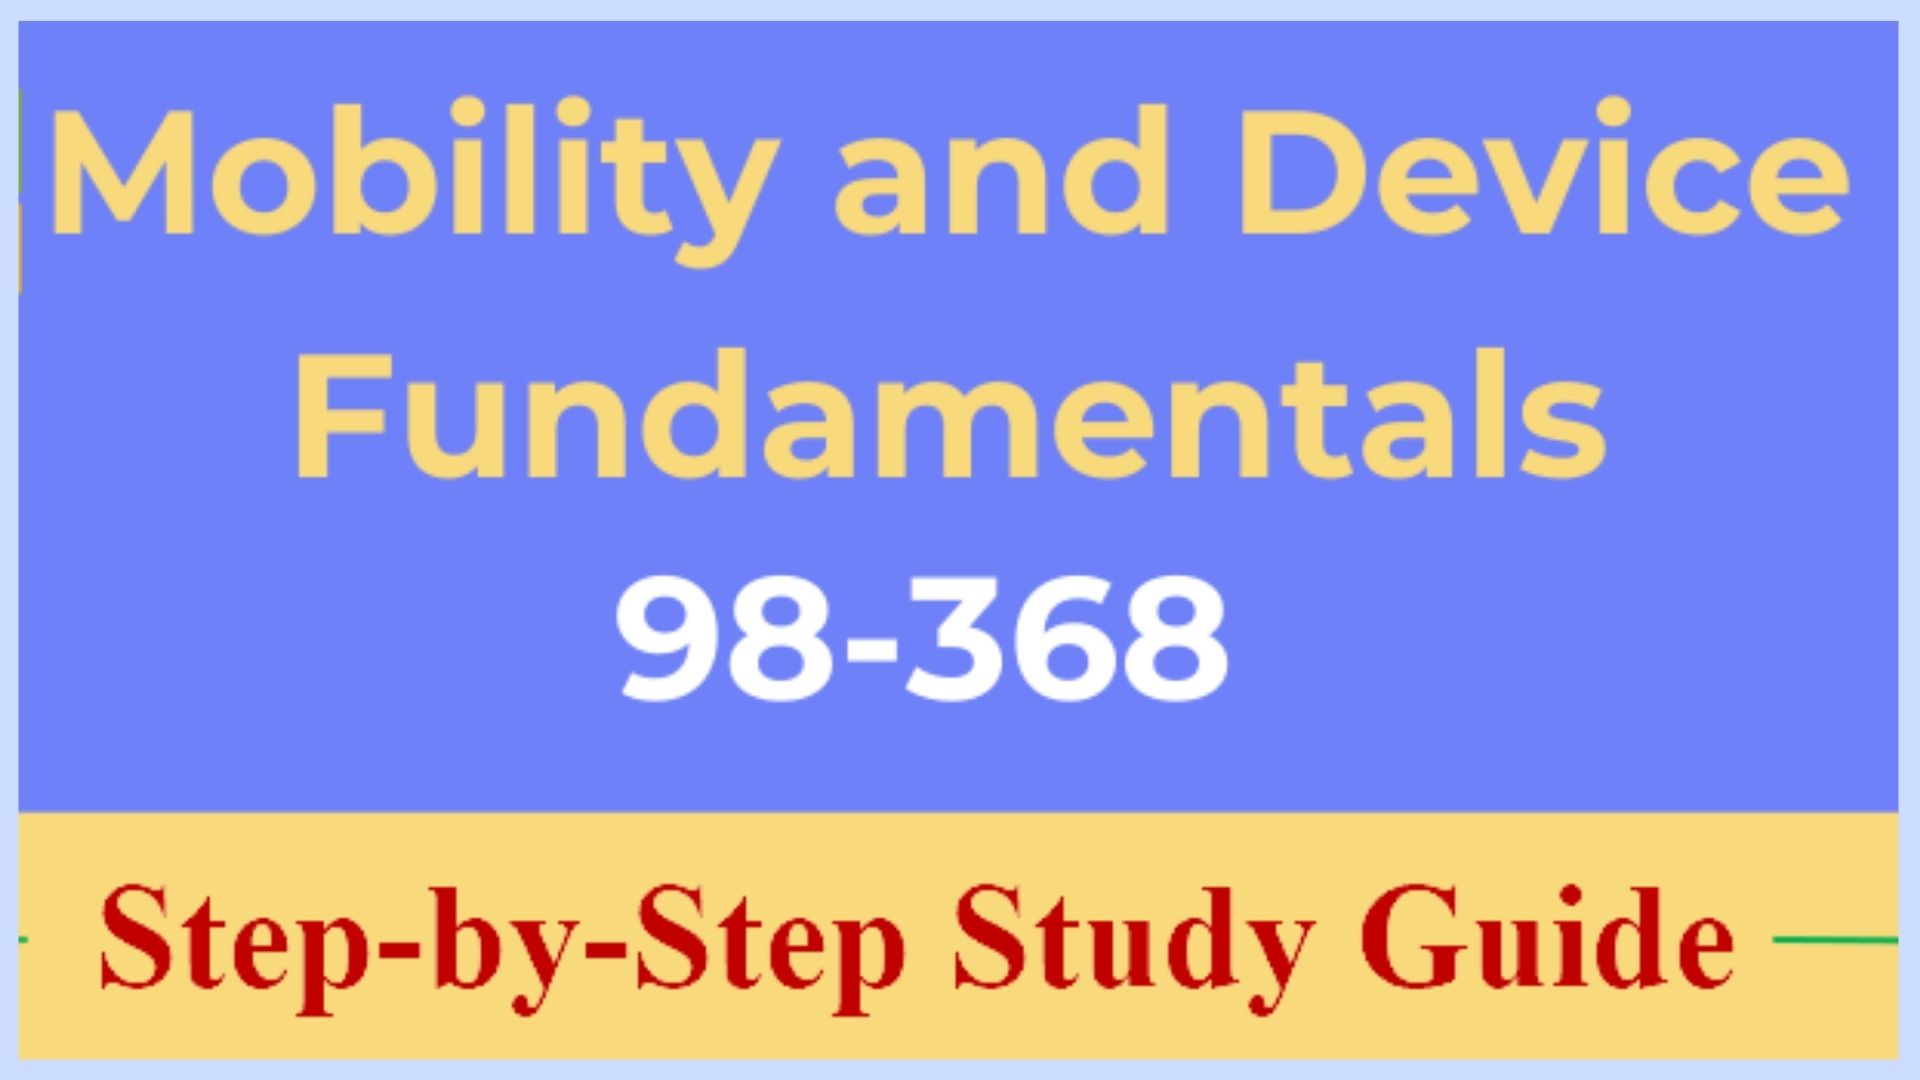 Mobility and Device Fundamentals